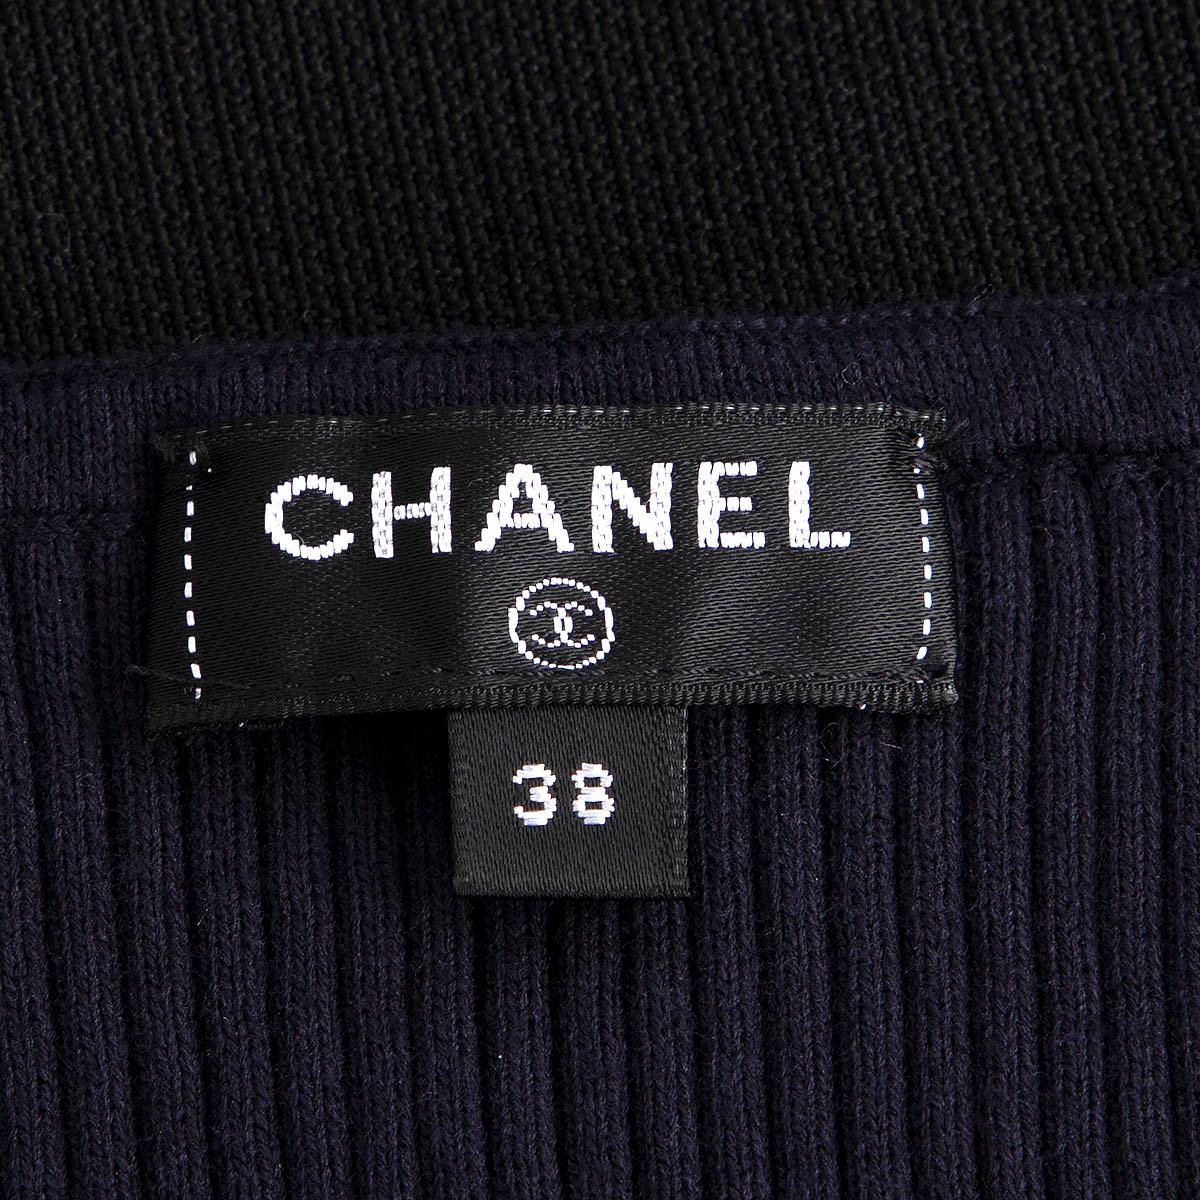 CHANEL navy blue cotton 2018 18S TEXTURED RIB-KNIT Tank Top Shirt 38 S For Sale 4